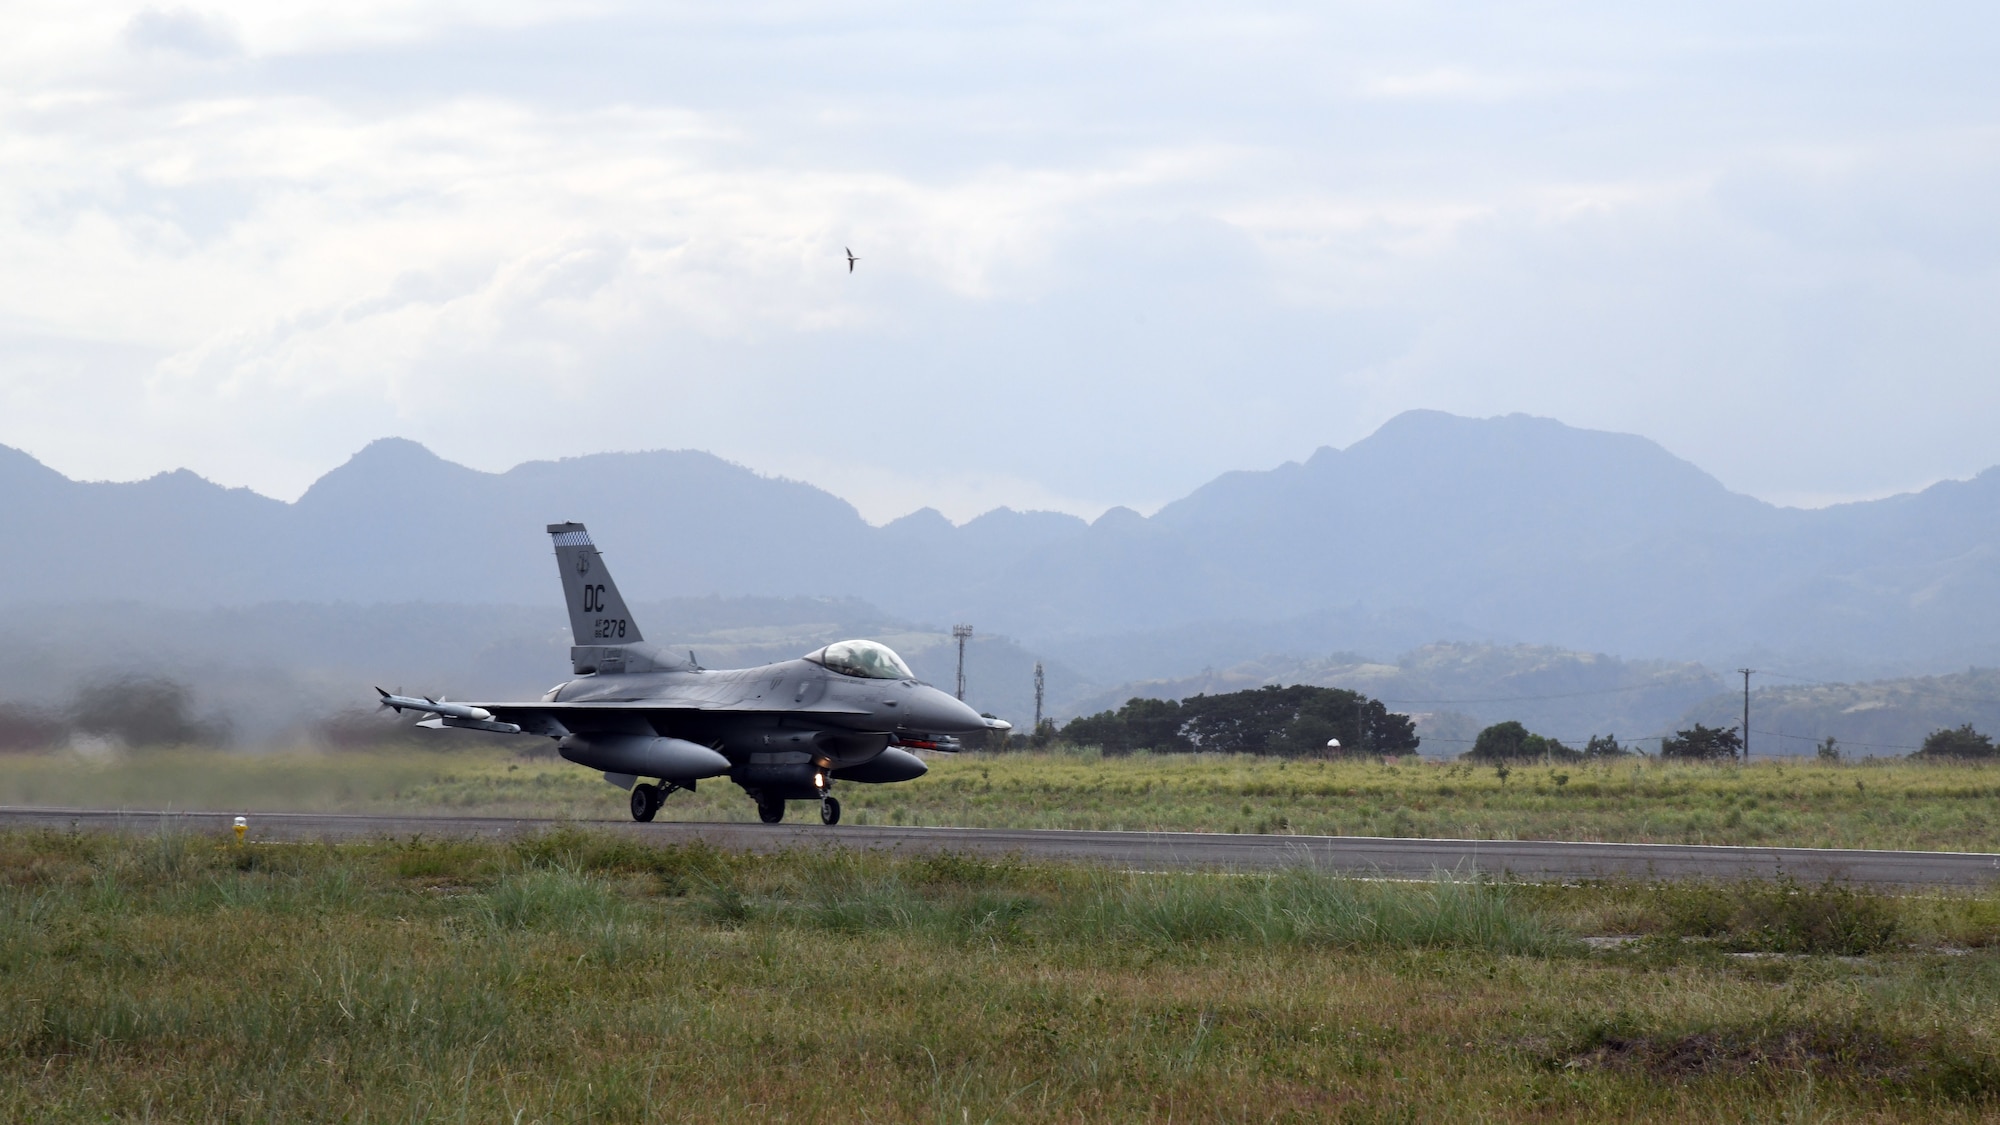 A U.S. Air Force F-16 Fighting Falcon takes off during the Bilateral Air Contingent Exchange-Philippines (BACE-P) at Cesar Basa Air Base, Philippines, Jan. 22, 2019.